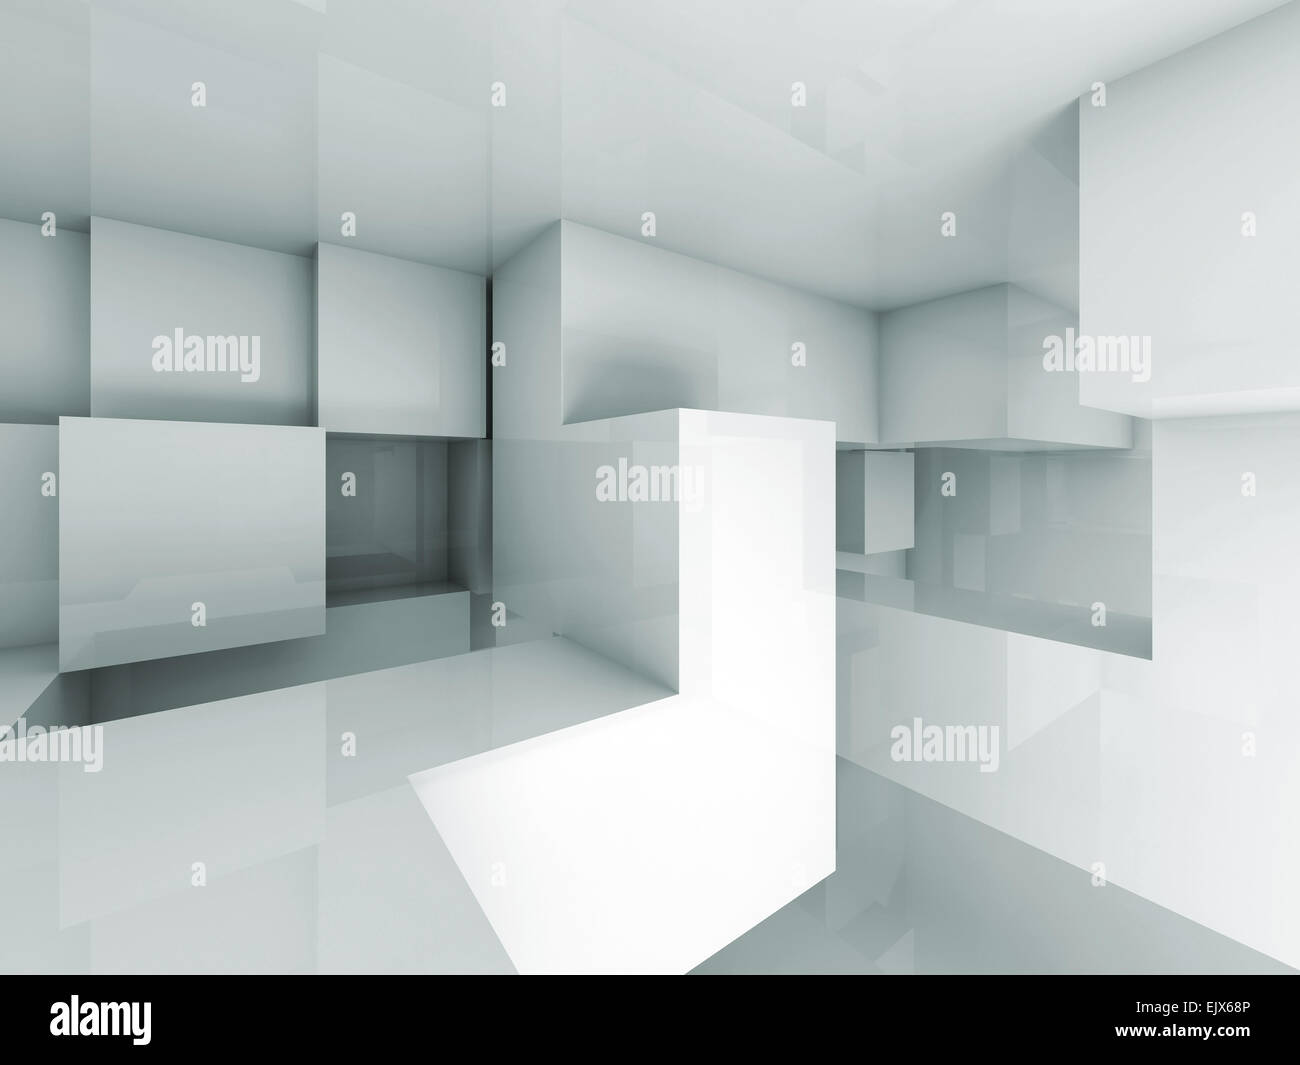 Abstract architecture background with cubes structure on the wall. 3d render illustration Stock Photo